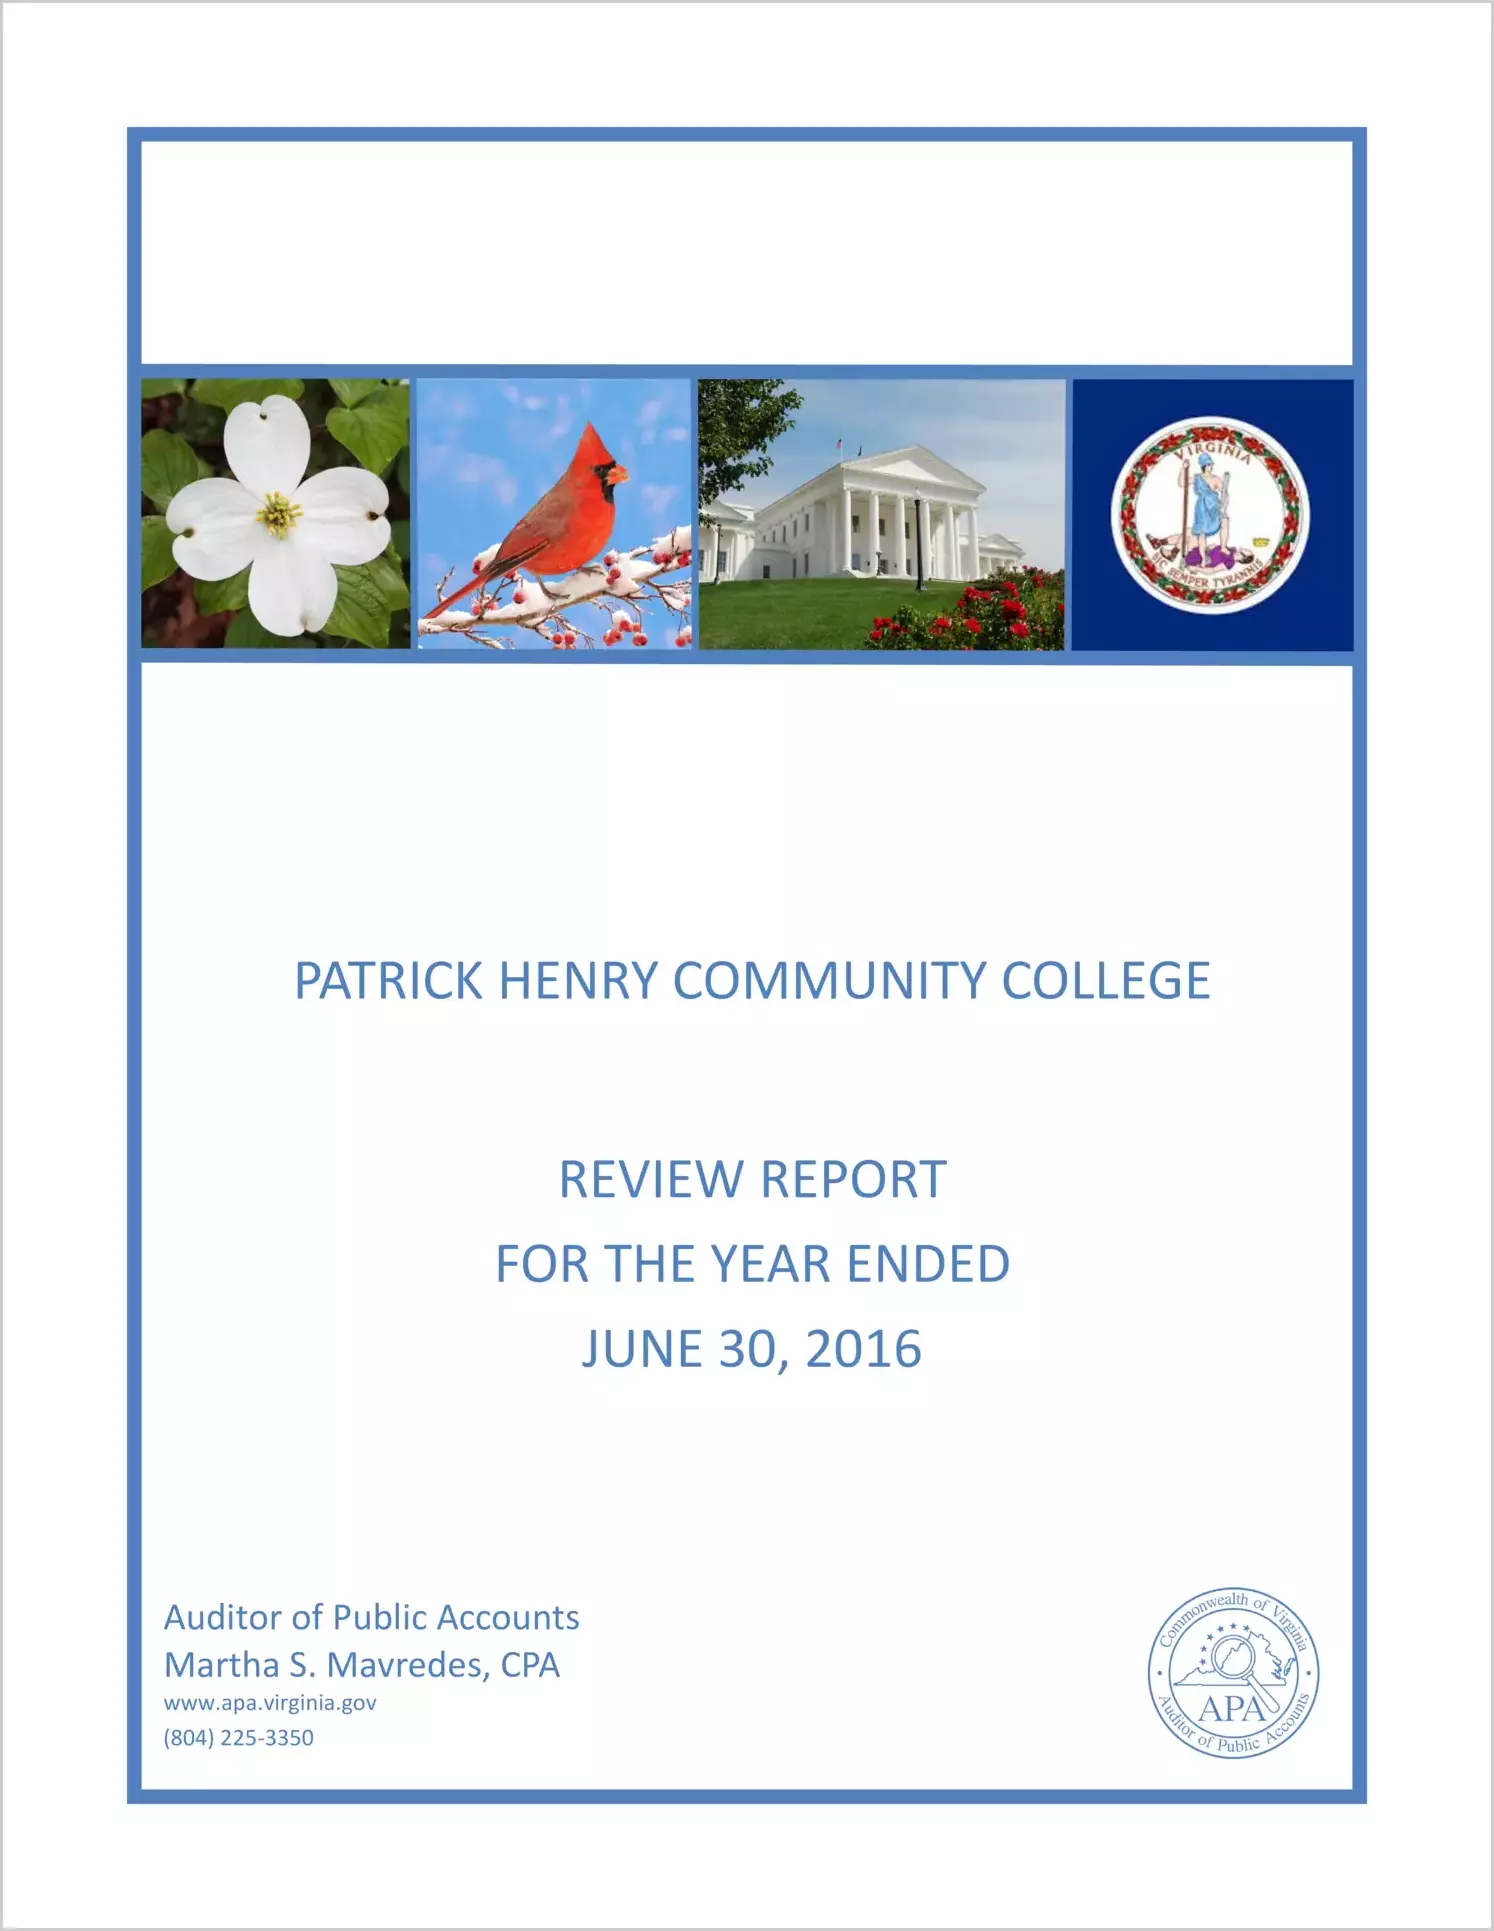 Patrick Henry Community College Review Report for the year ended June 30, 2016